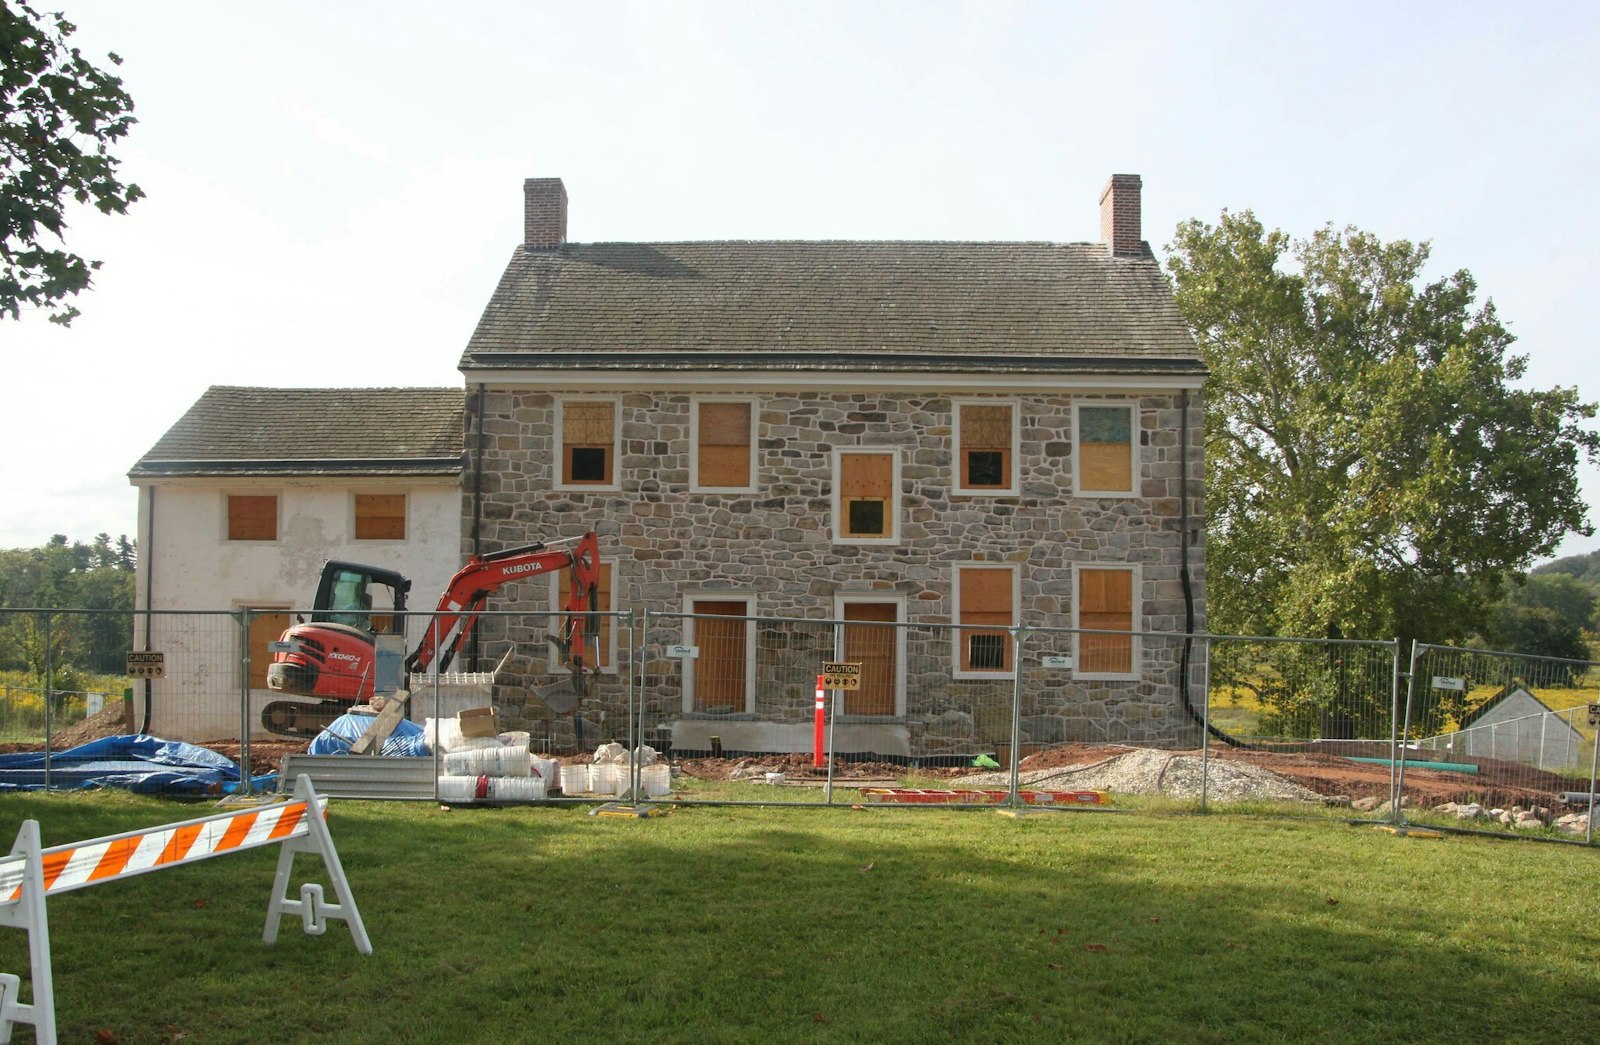 Construction equipment outside a two-story stone home with windows, surrounded by trees